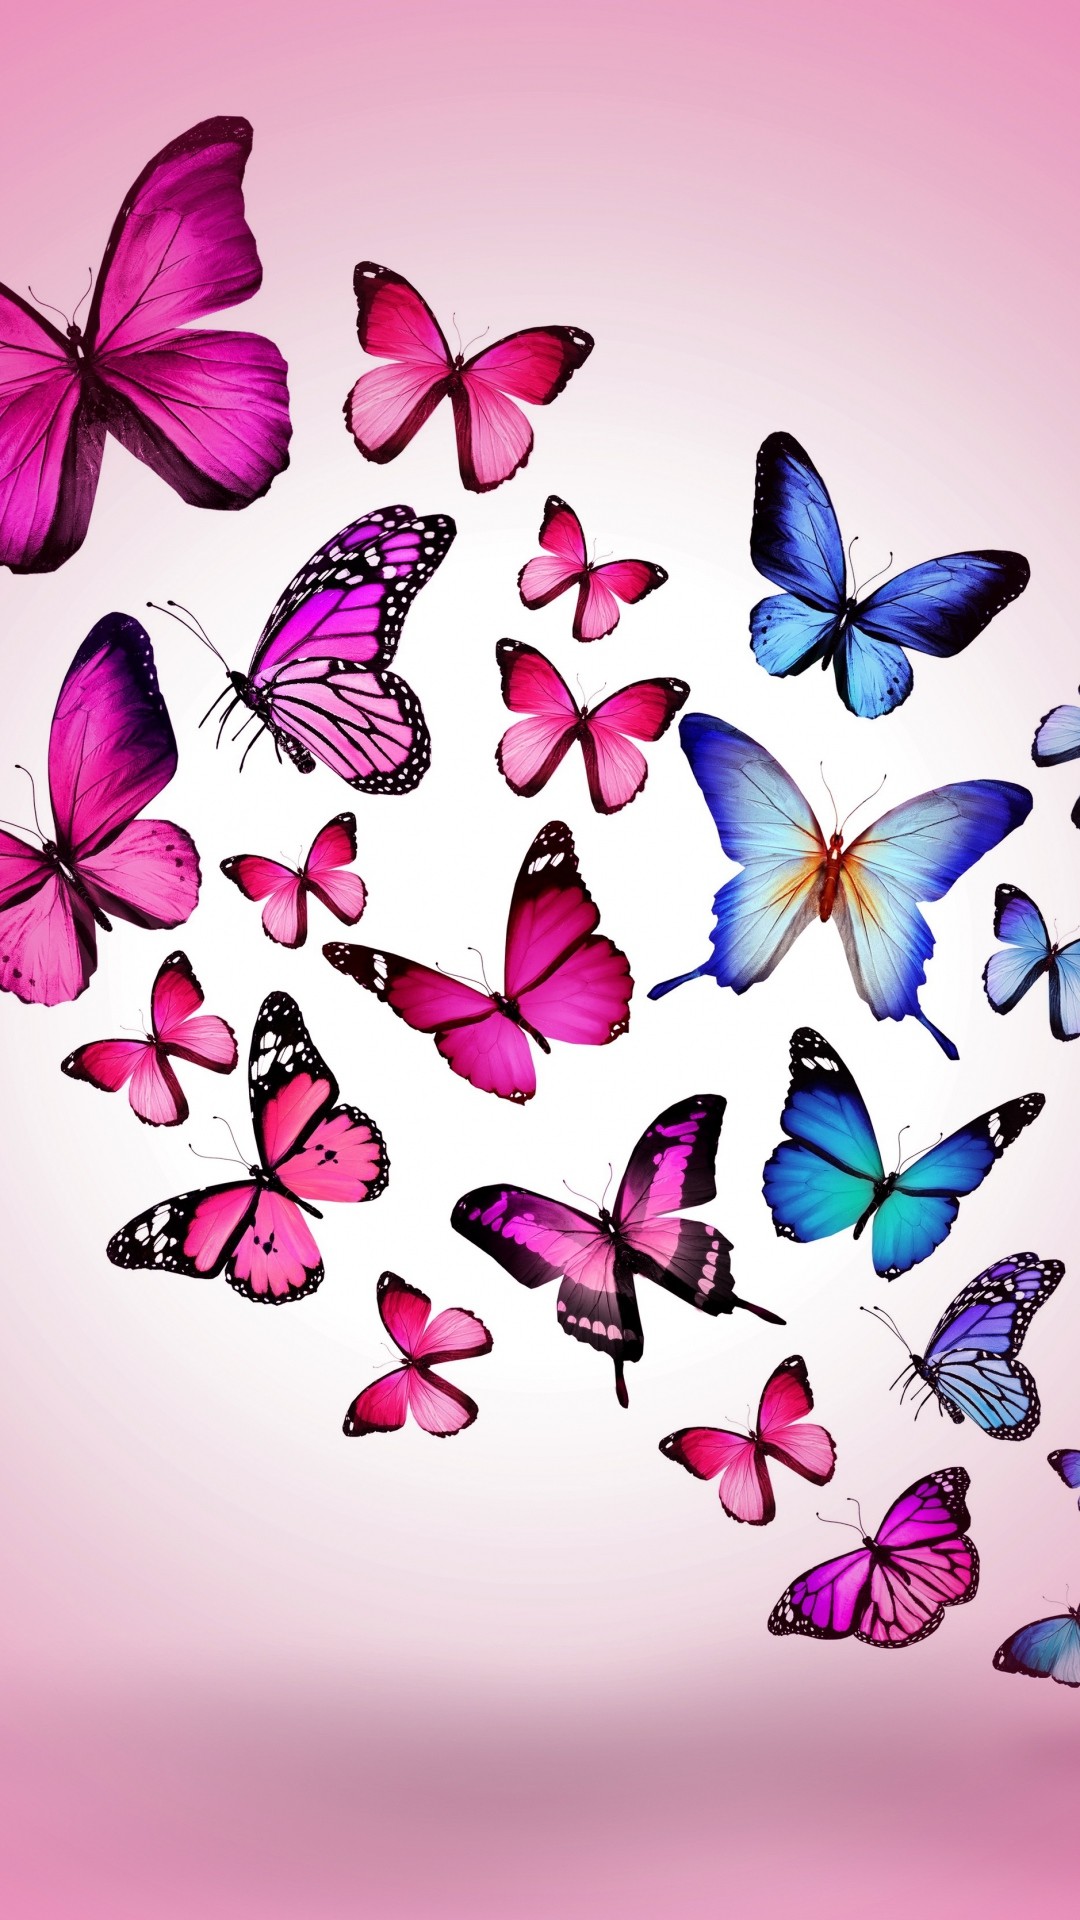 1080x1920 Butterfly Drawing Flying Colorful Background Pink iPhone 6 wallpaper